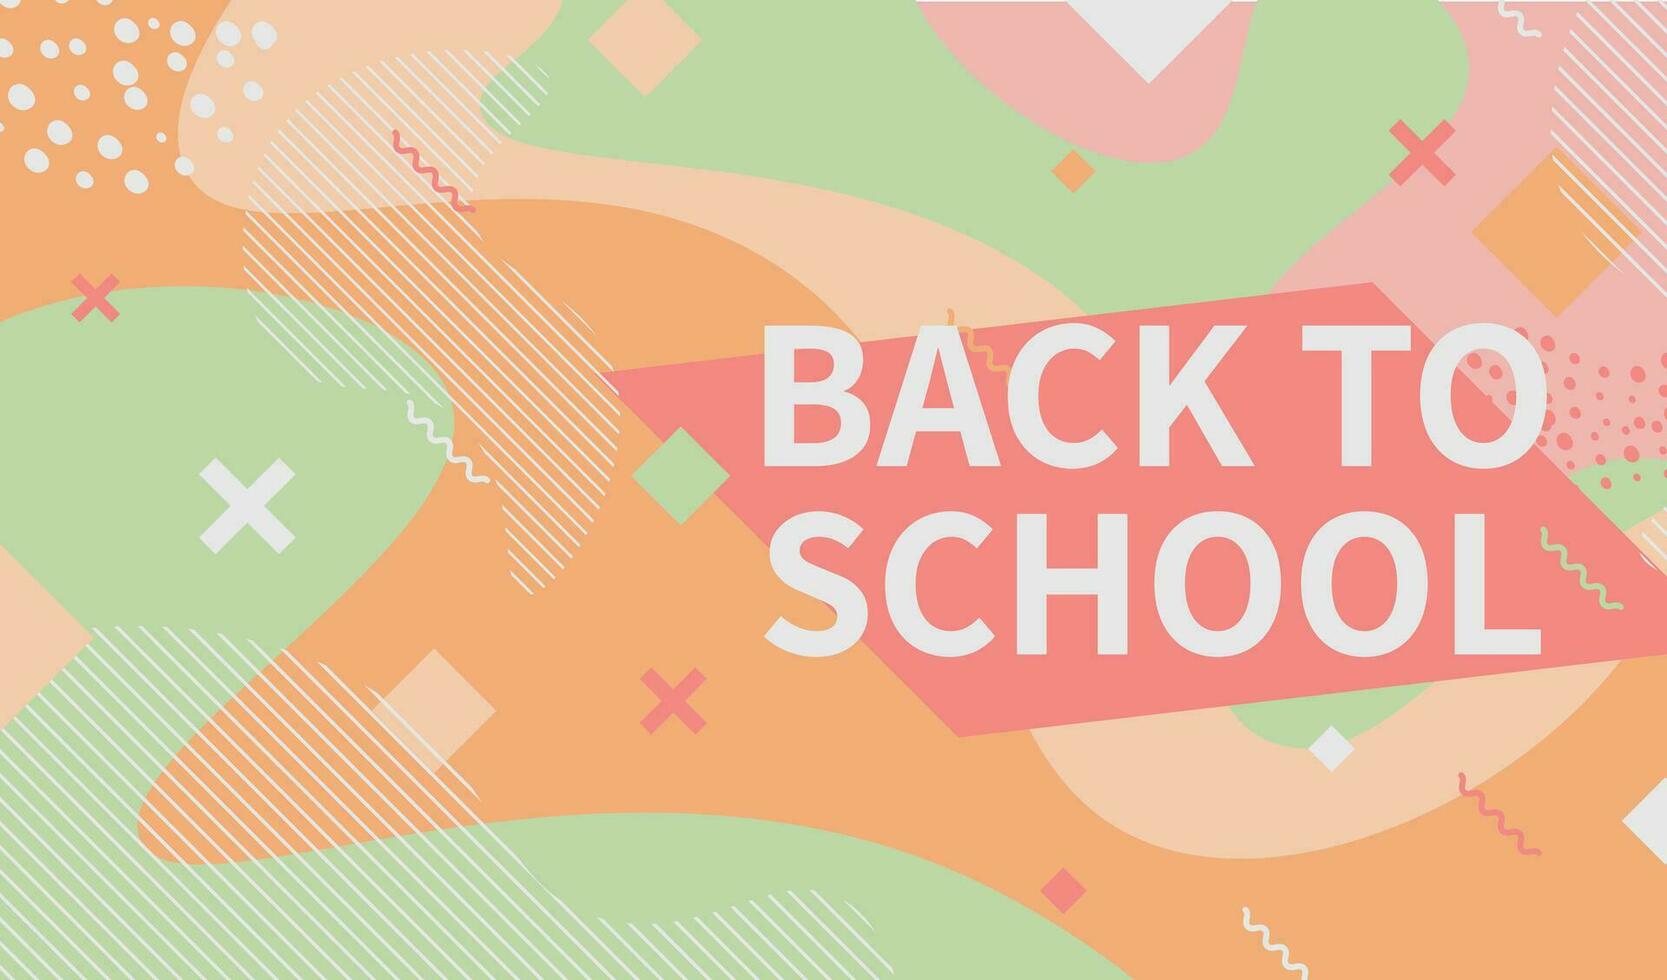 Abstract vector banner with back to school text and geometric shapes.